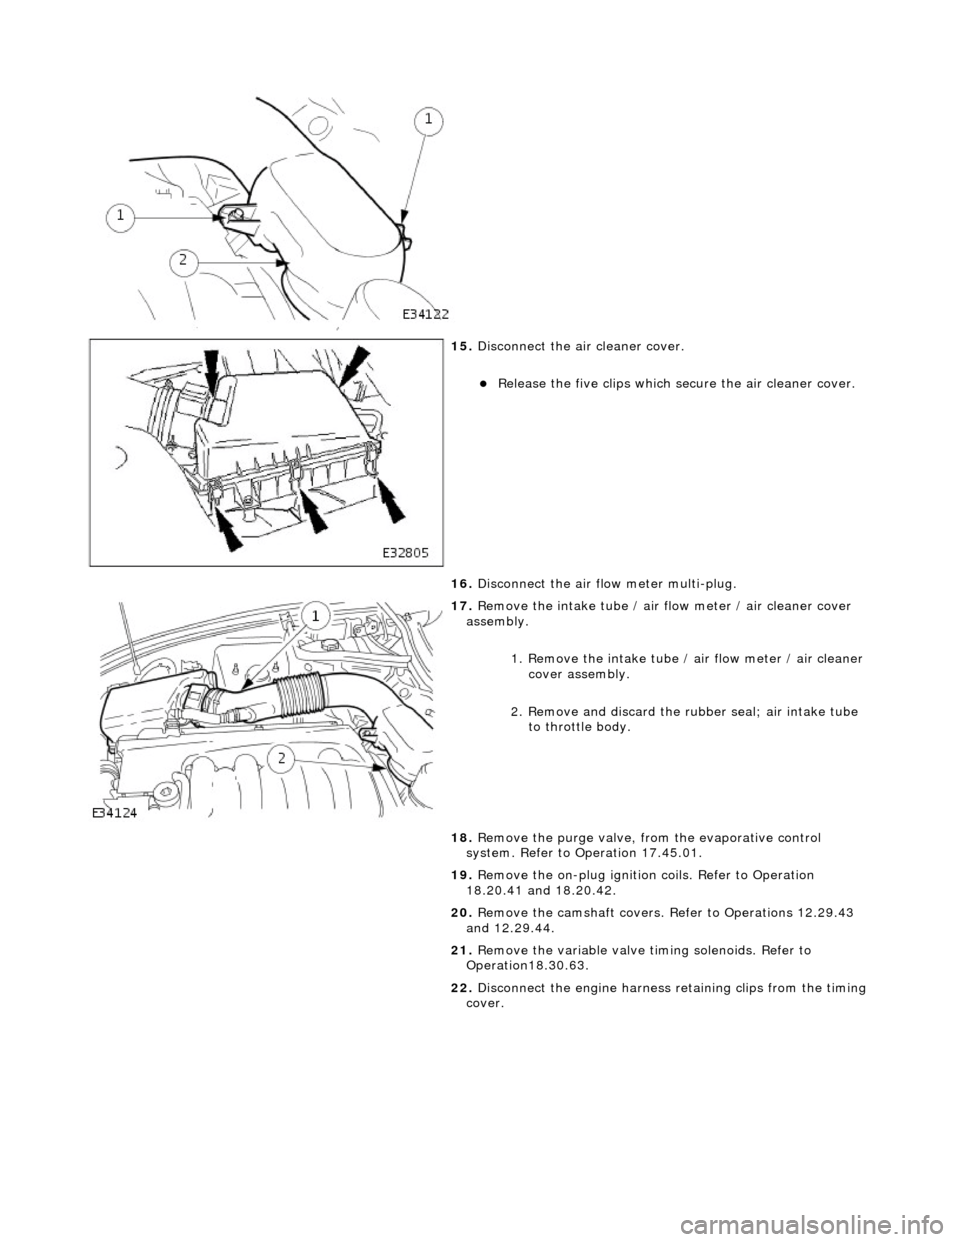 JAGUAR X308 1998 2.G Workshop Manual  
 
15
. 
Disconnect the air cleaner cover. 
R
 elease the five clips which se
cure the air cleaner cover.  
16.  Disconnect the air flow meter multi-plug. 
 
17
 . 
Remove the intake tube / air  f